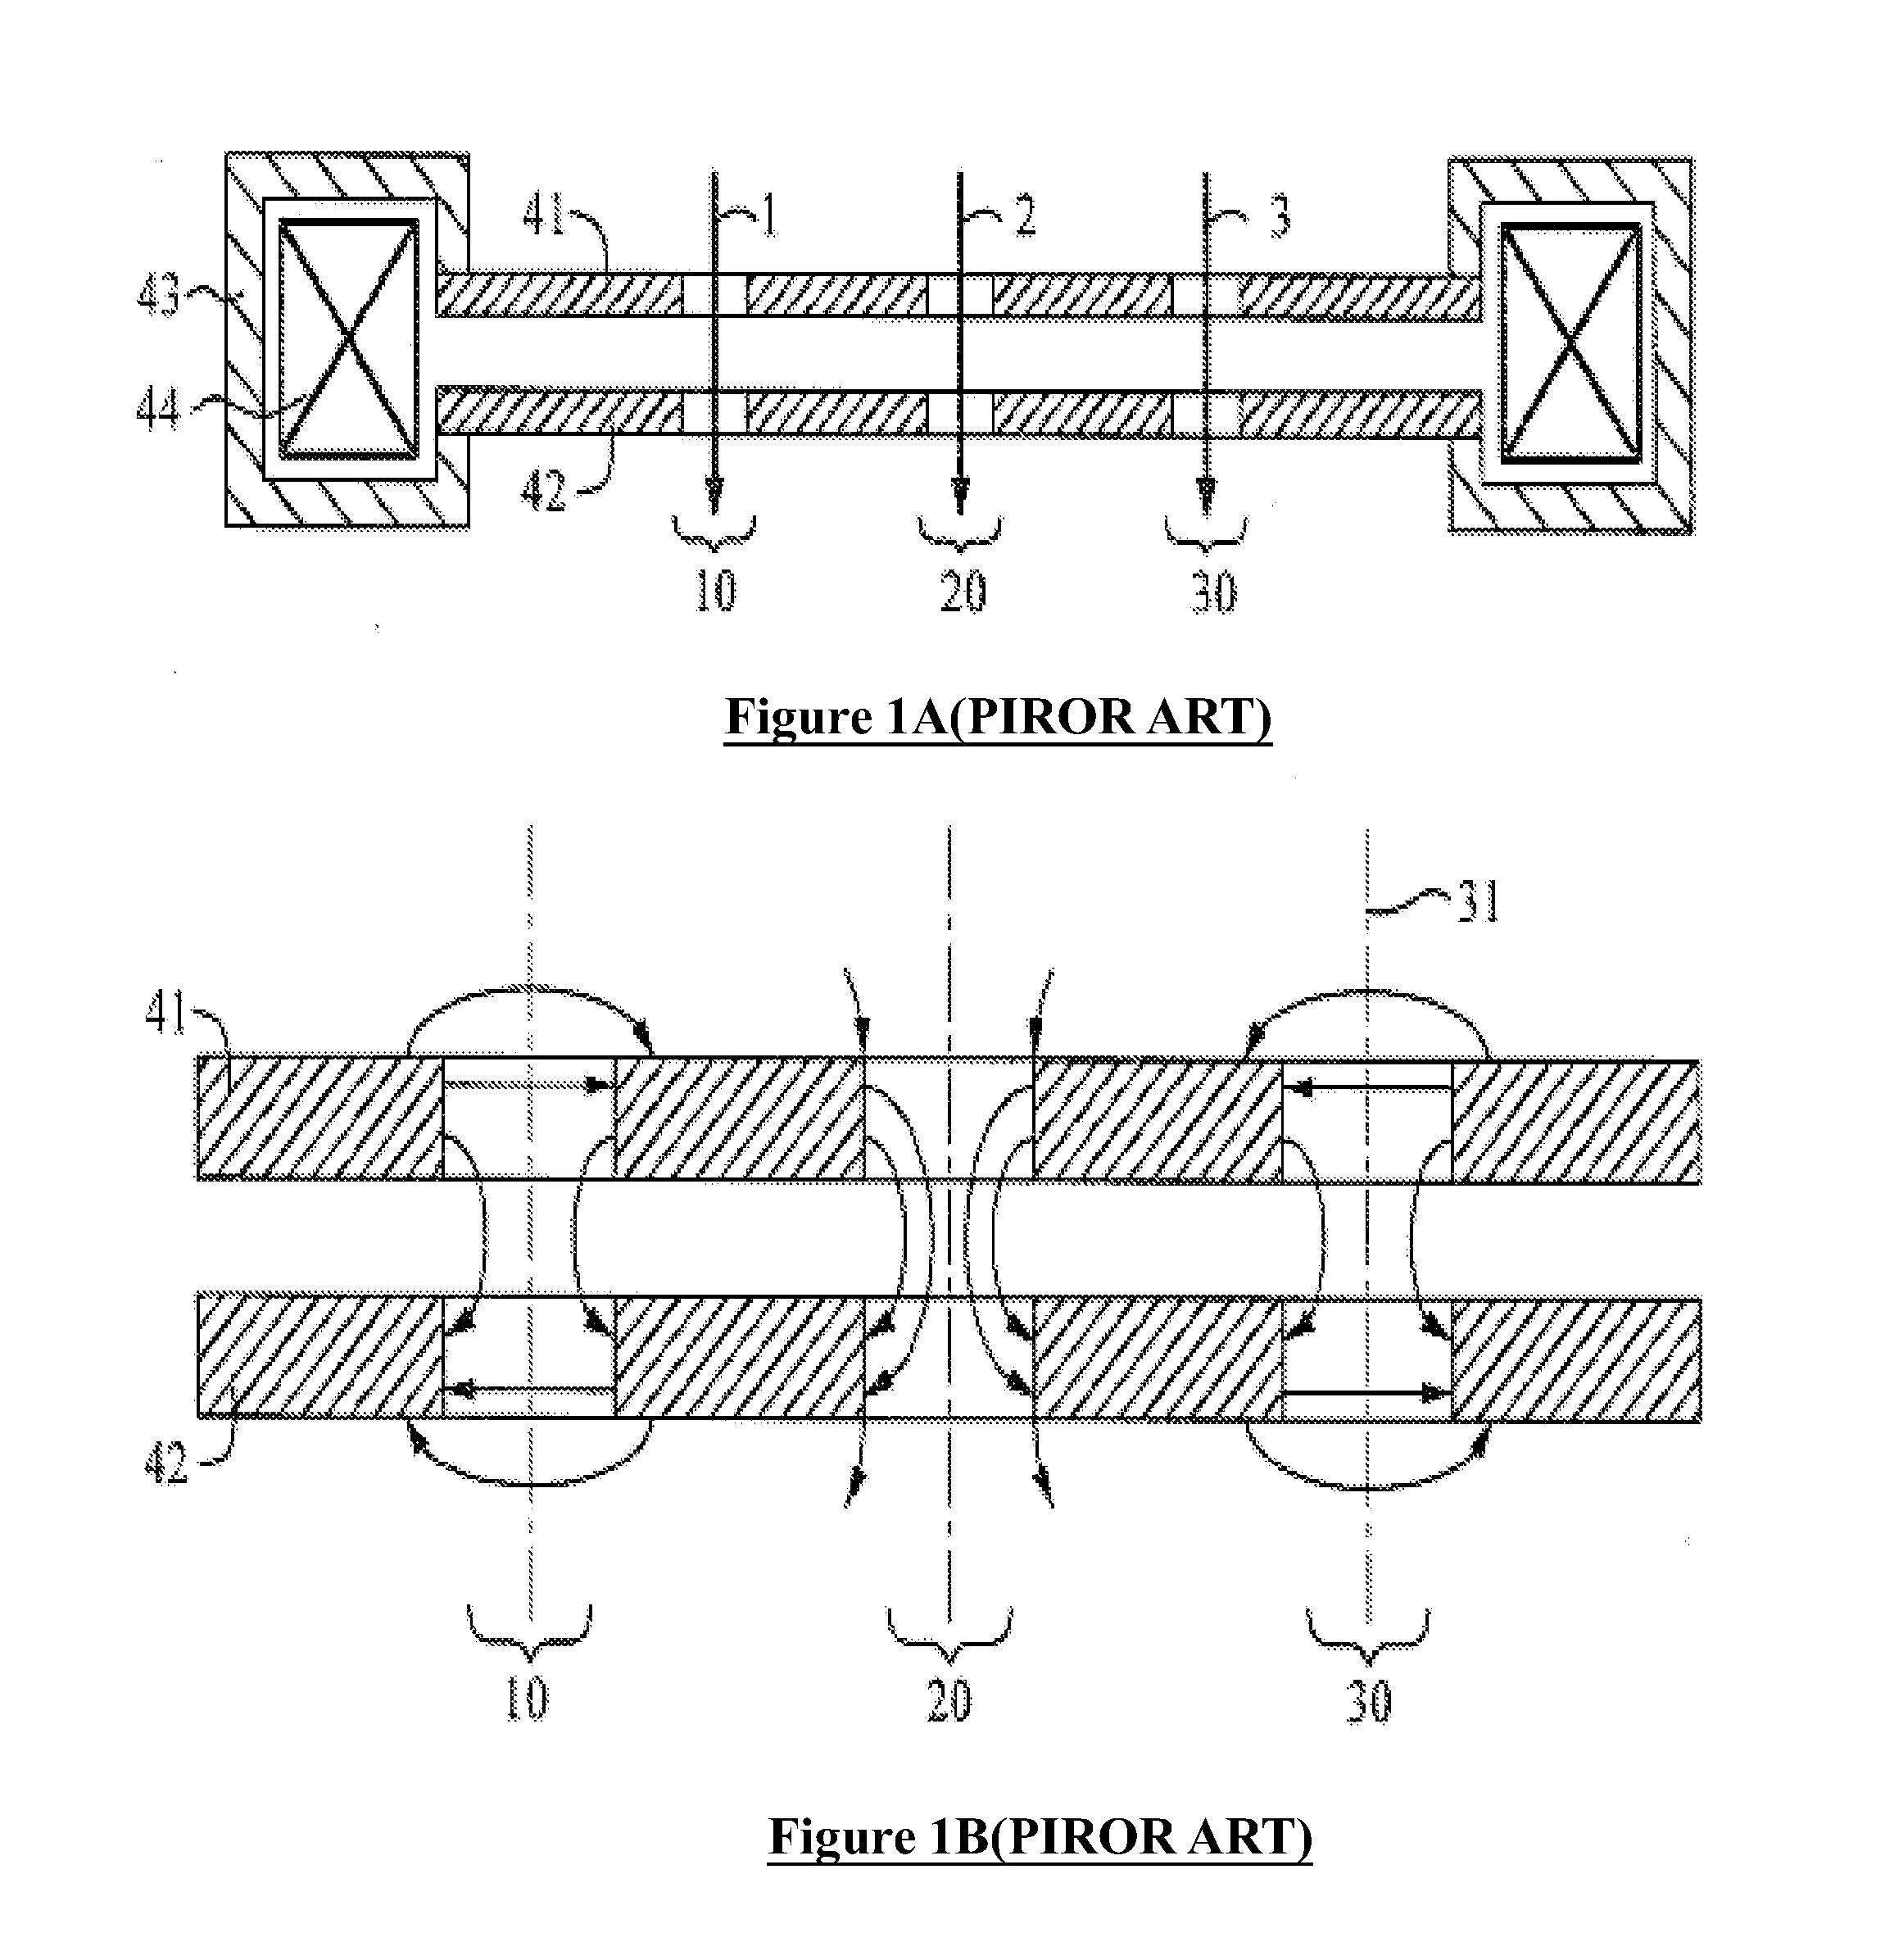 Multi-axis Magnetic Lens for Focusing a Plurality of Charged Particle Beams